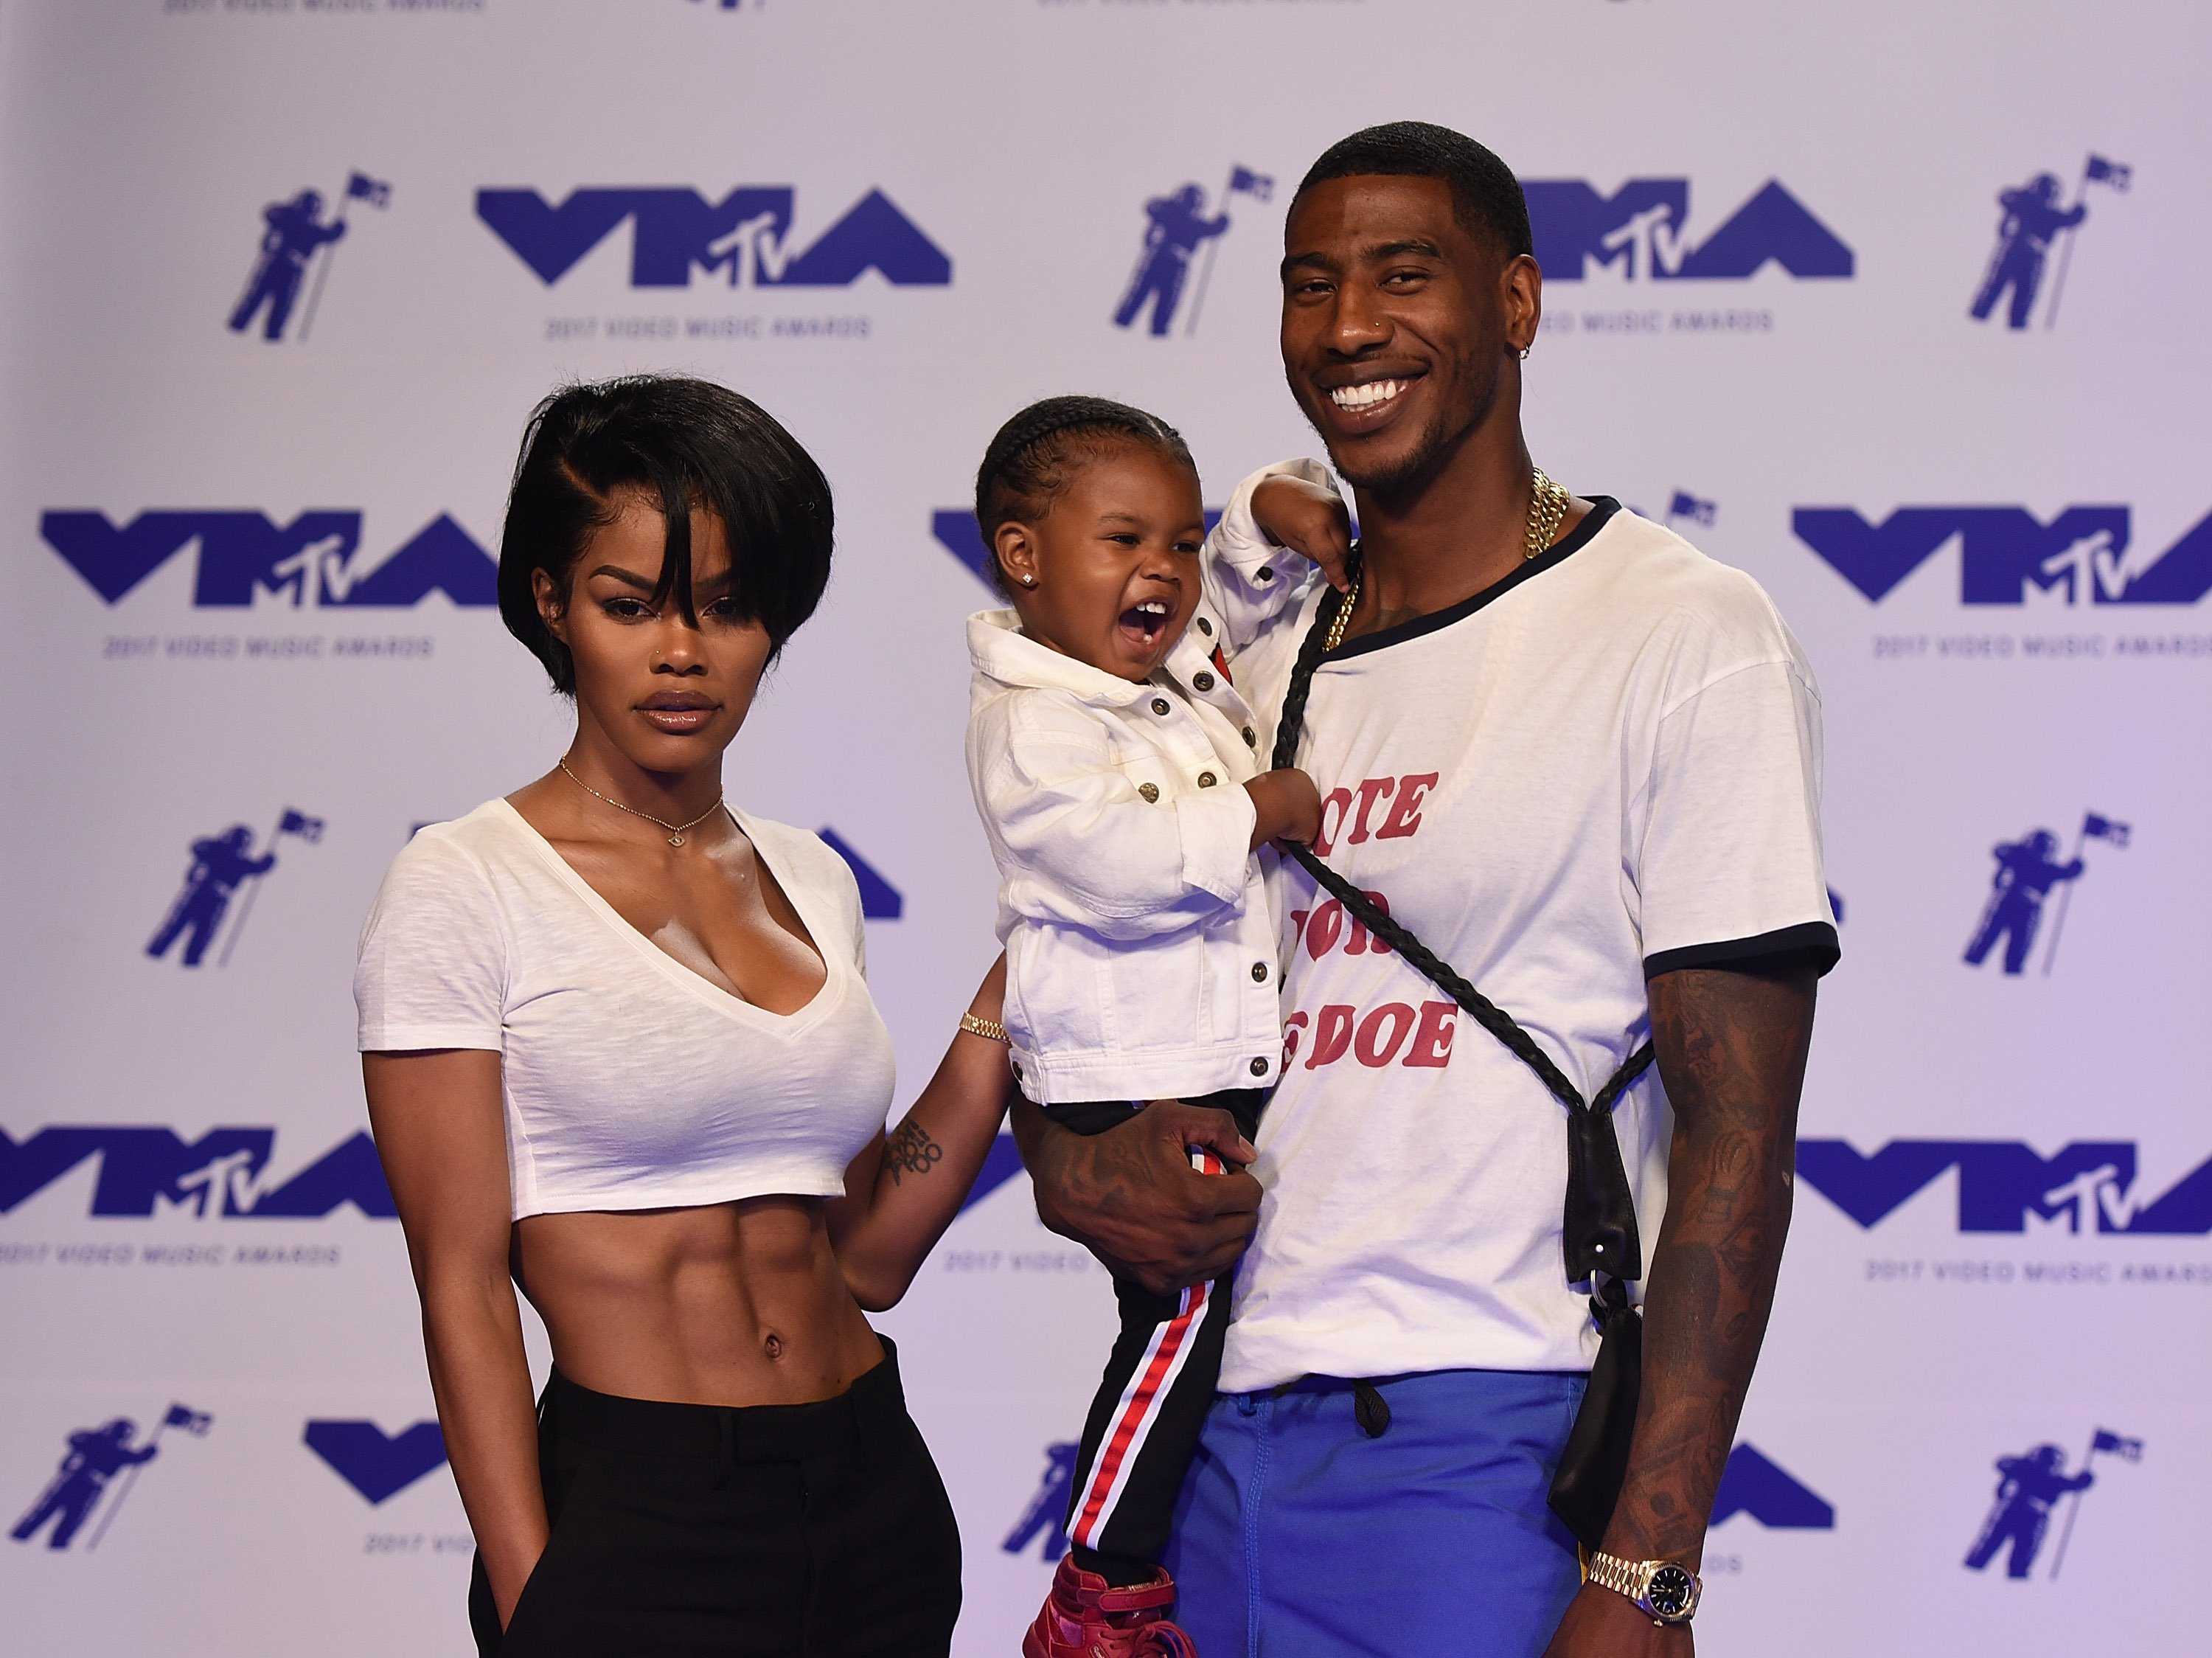  Teyana Taylor Iman Shumpert and Iman Shumpert Jr. at the 2017 MTV Video Music Awards at The Forum on August 27, 2017 in Inglewood, California. |Source: Getty Images